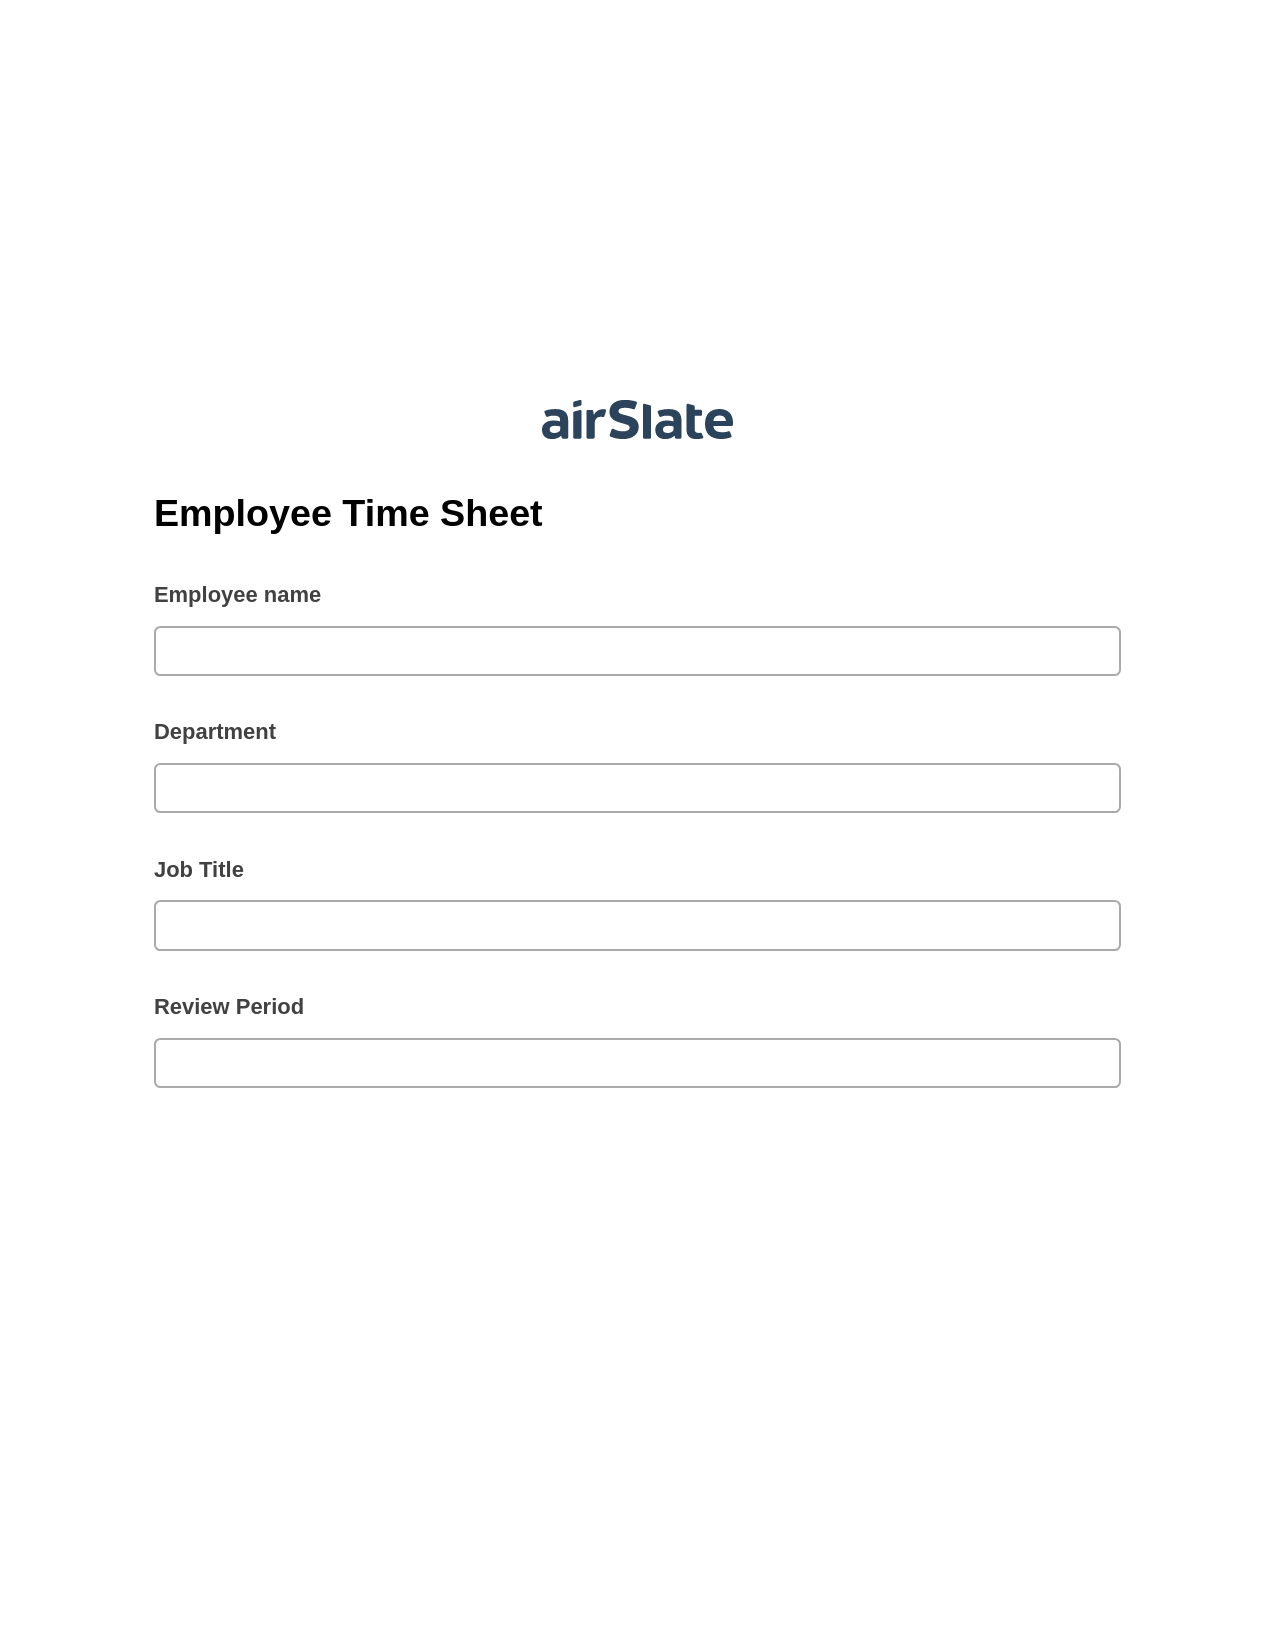 Employee Time Sheet Pre-fill from CSV File Bot, Create Salesforce Records Bot, Export to Google Sheet Bot